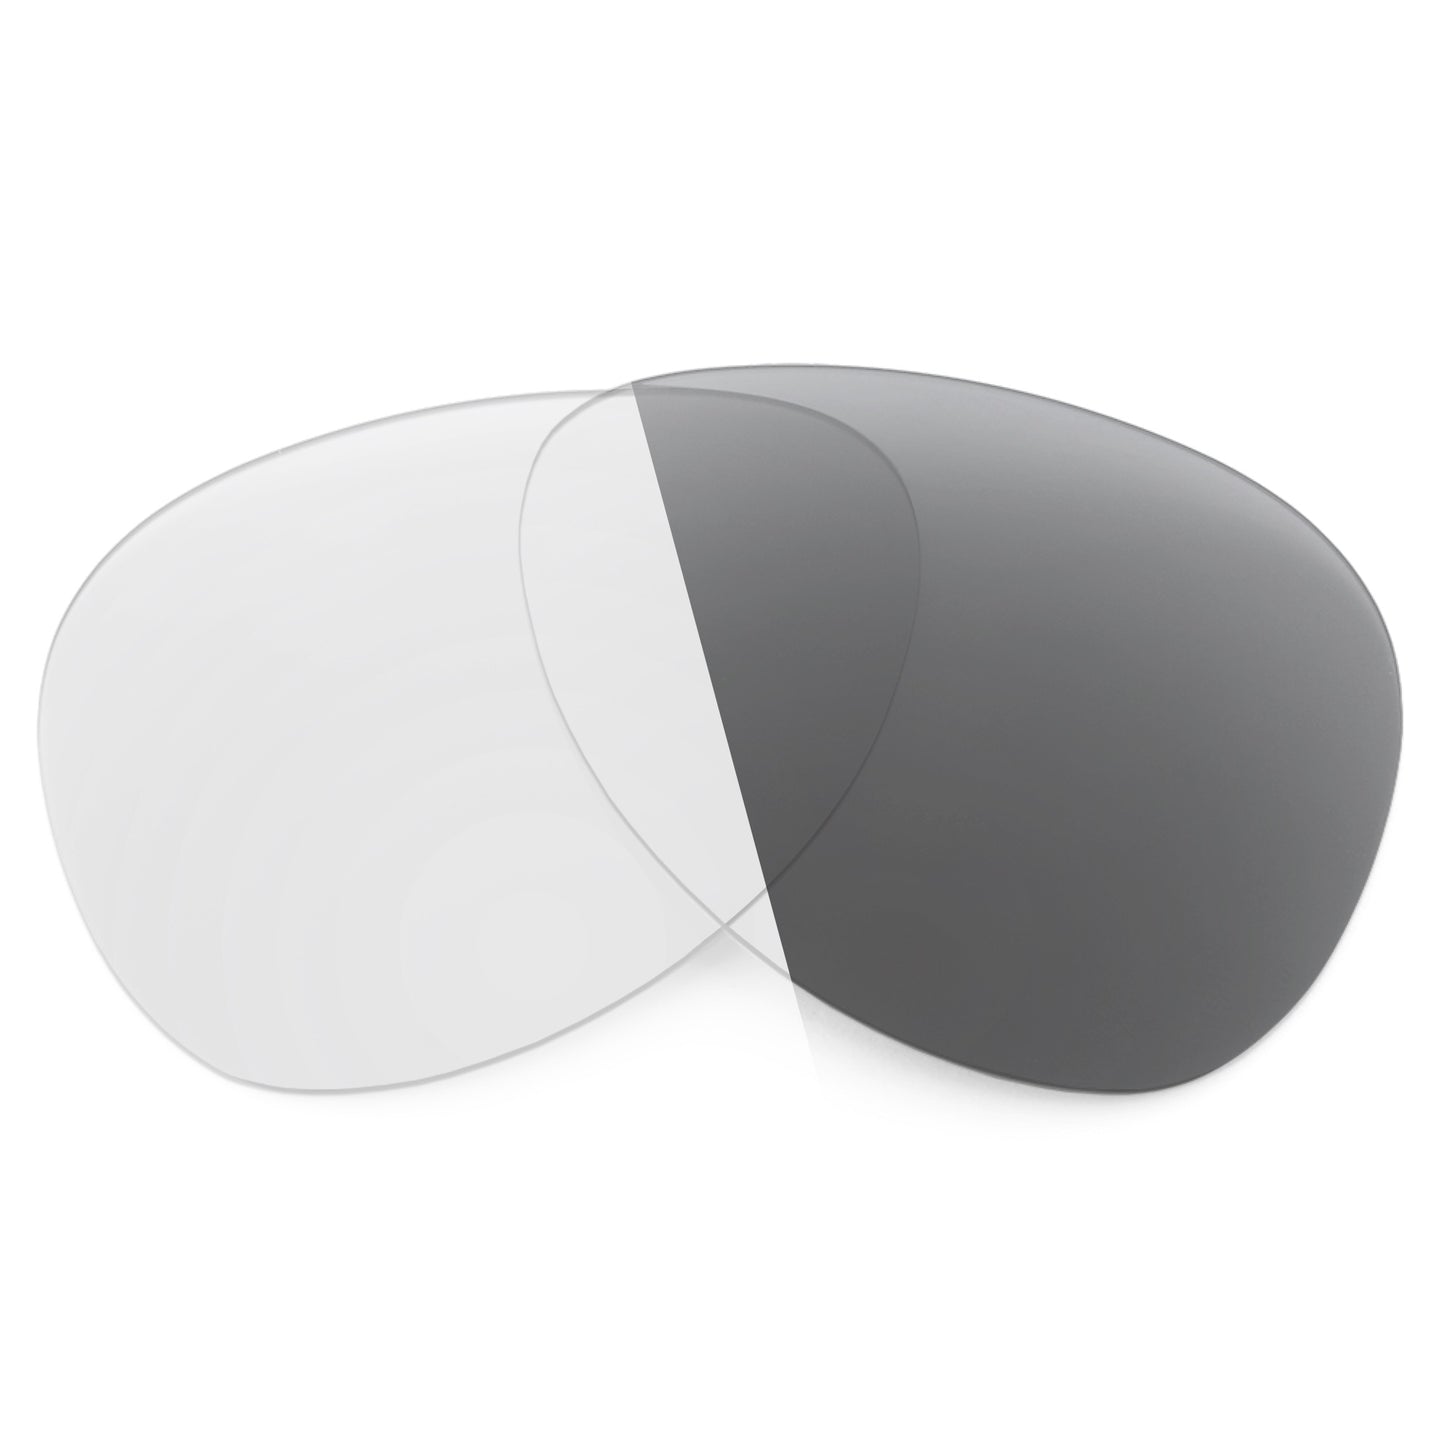 Revant replacement lenses for Ray-Ban Outdoorsman RB3030 58mm Non-Polarized Adapt Gray Photochromic